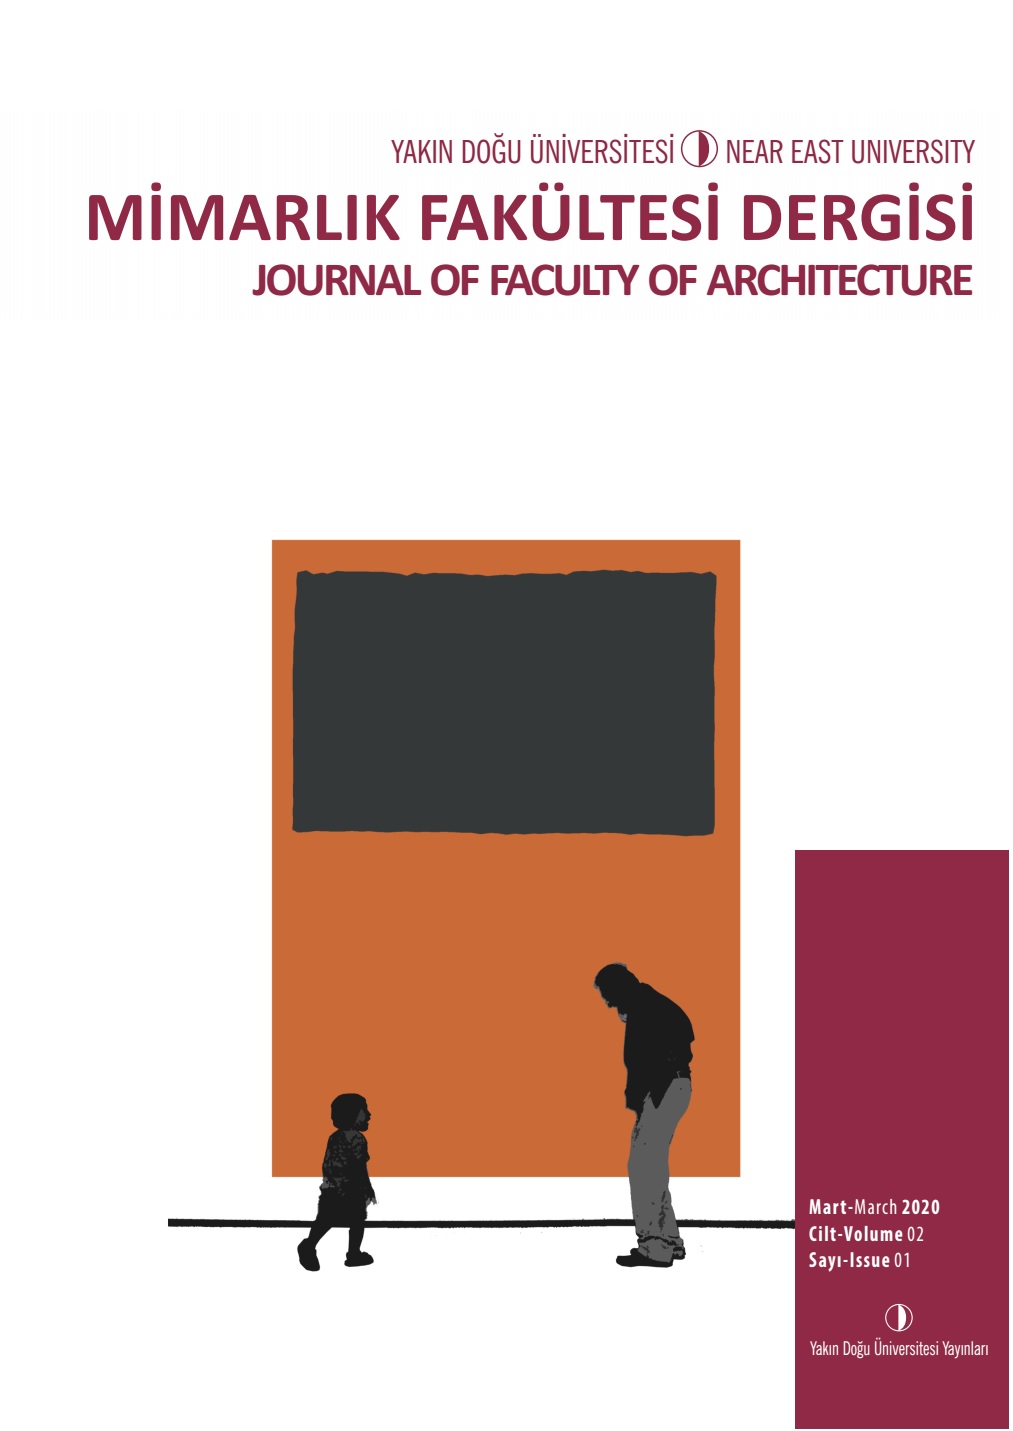 					View Vol. 2 No. 1 (2020): Journal of Faculty of Architecture
				